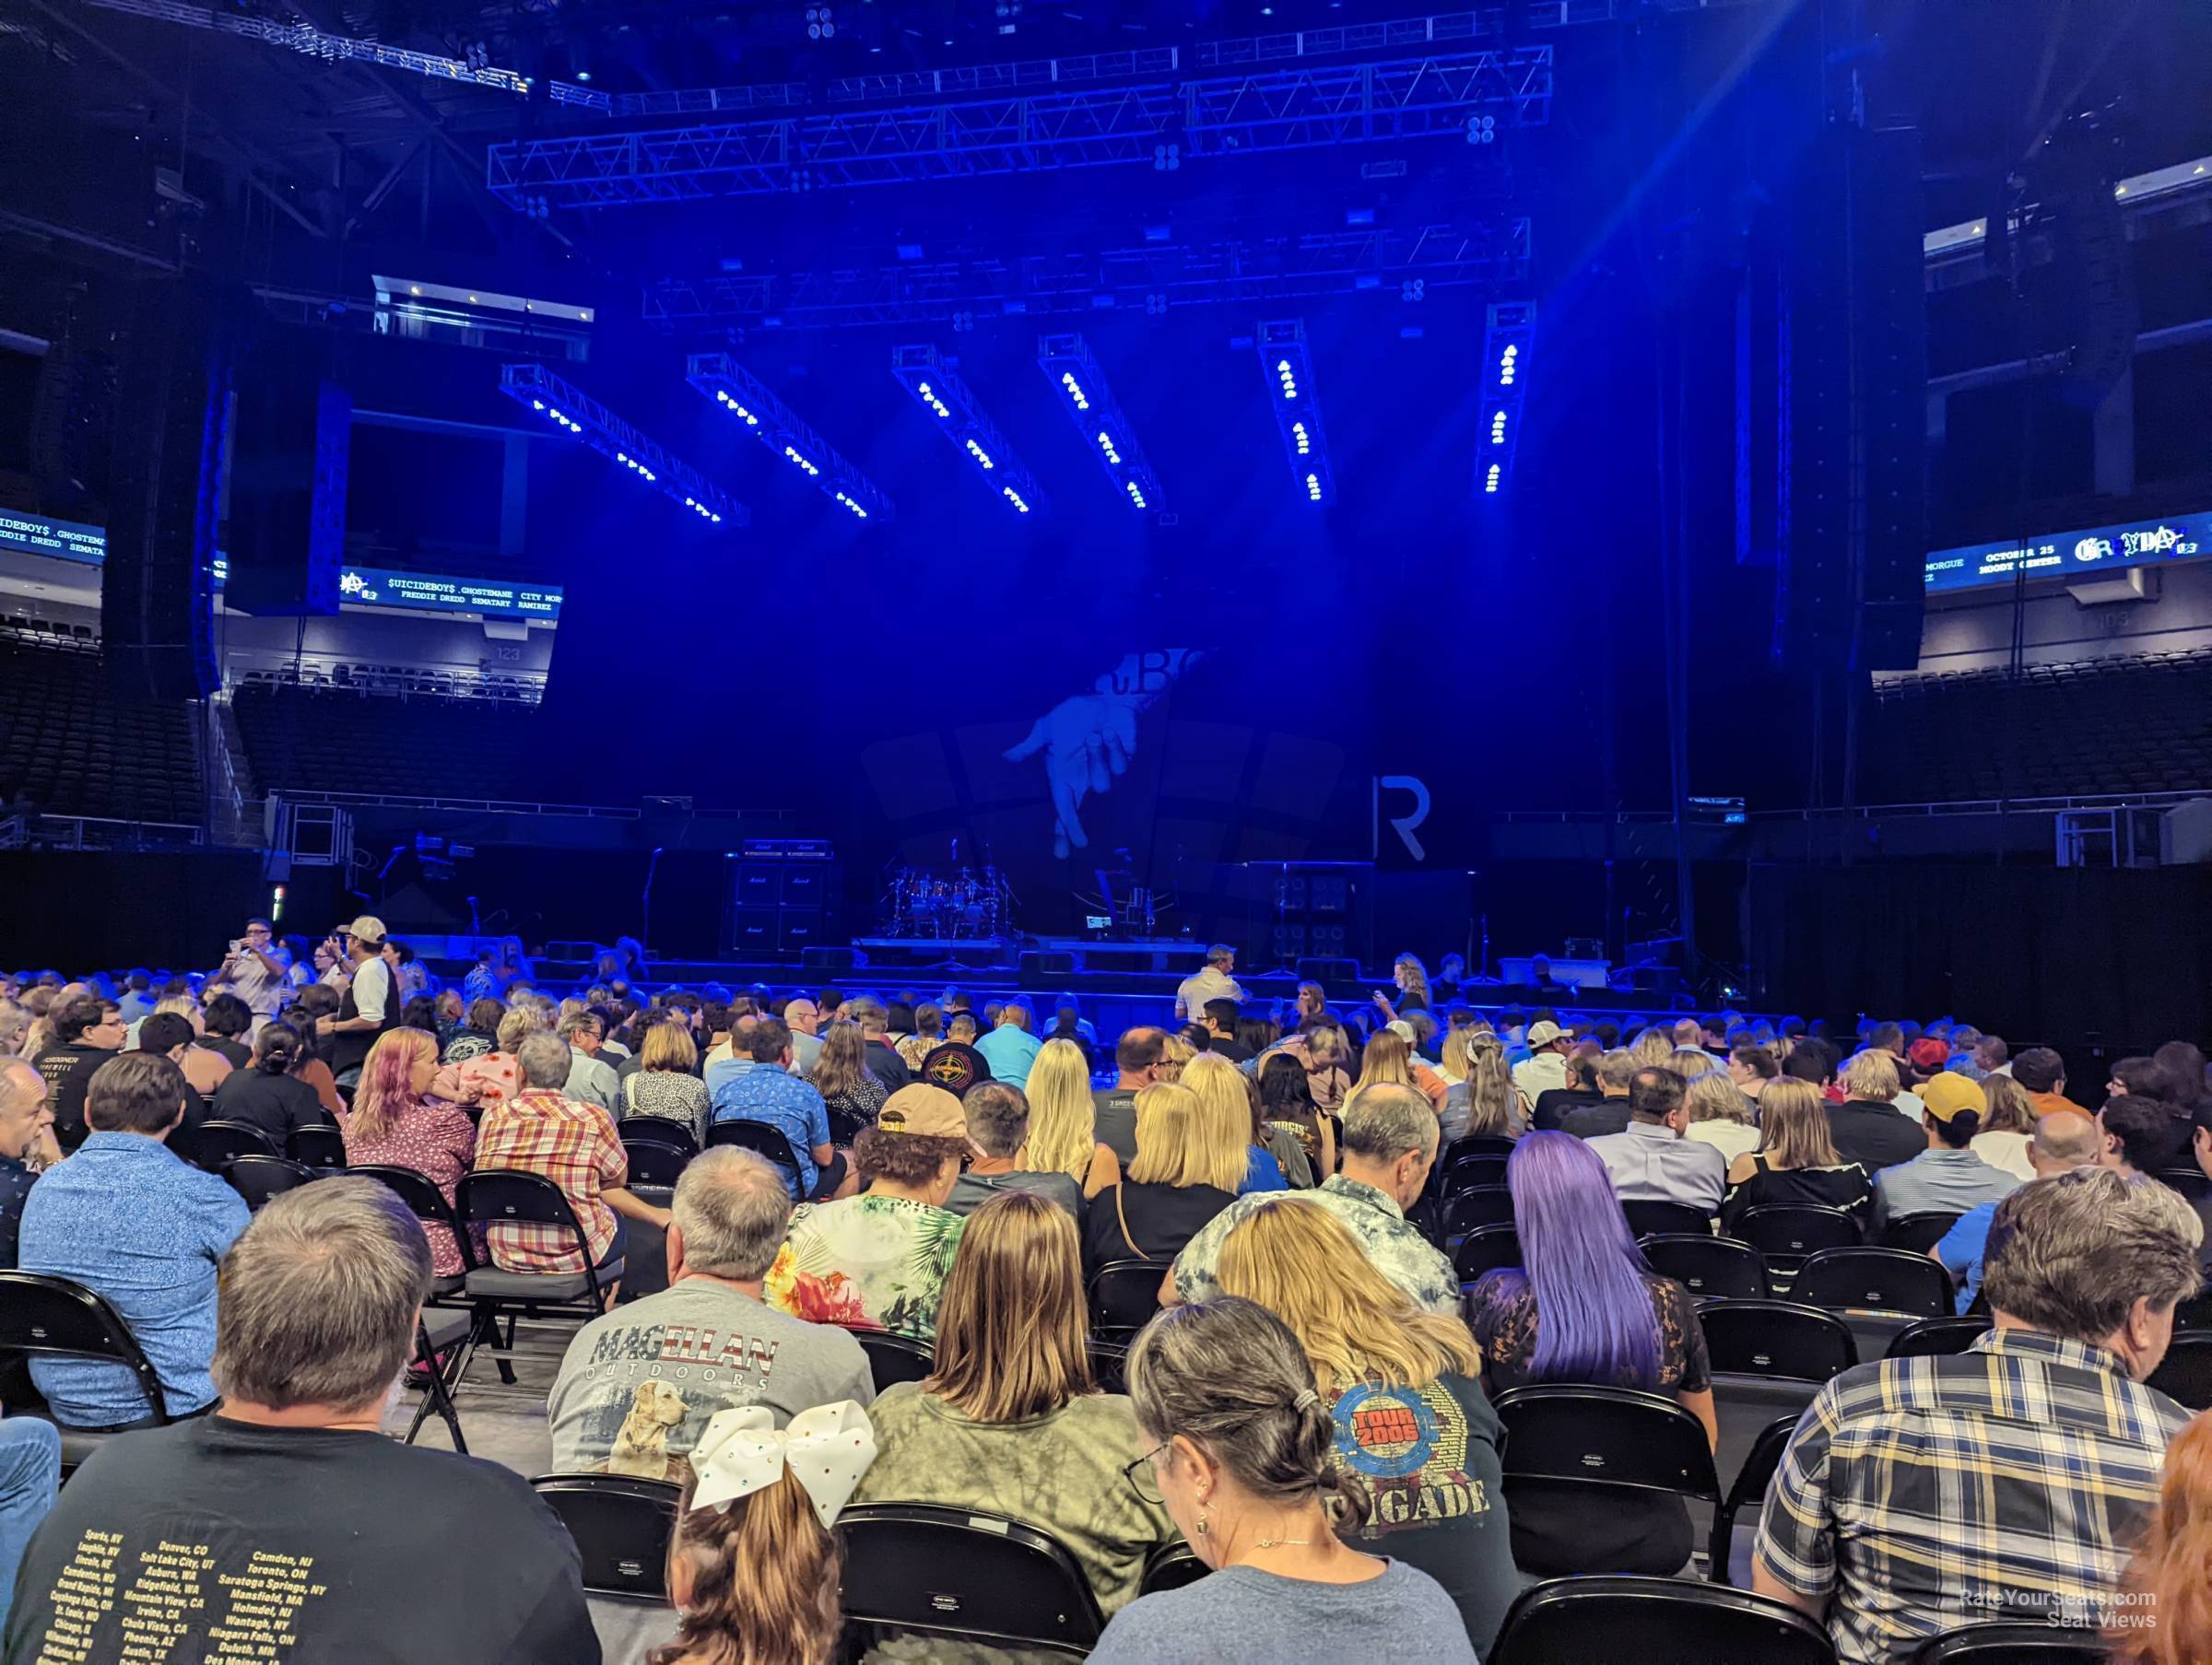 floor 2, row 18 seat view  for concert - moody center atx